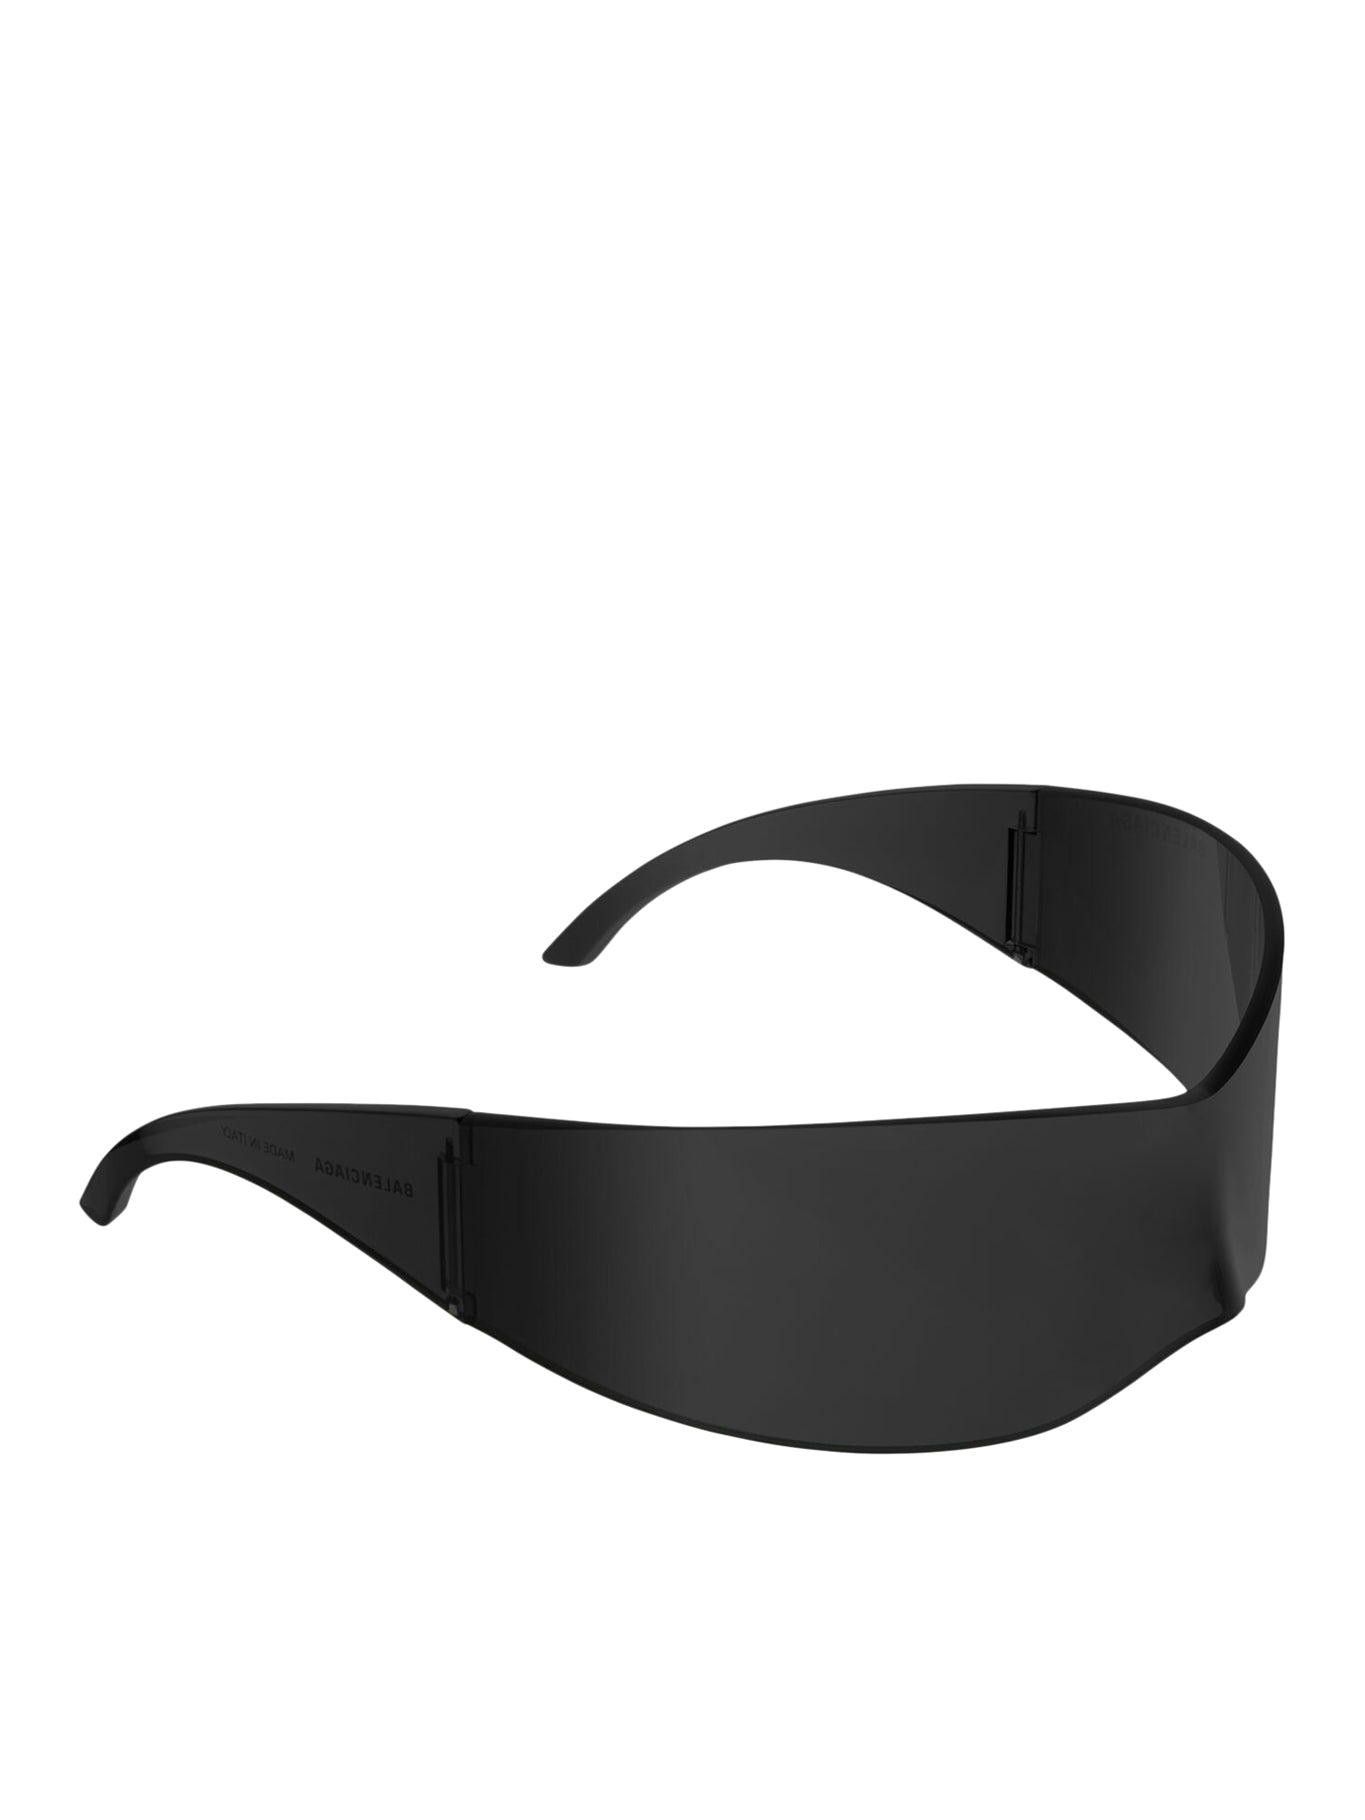 PANTHER MASK SUNGLASSES IN BLACK